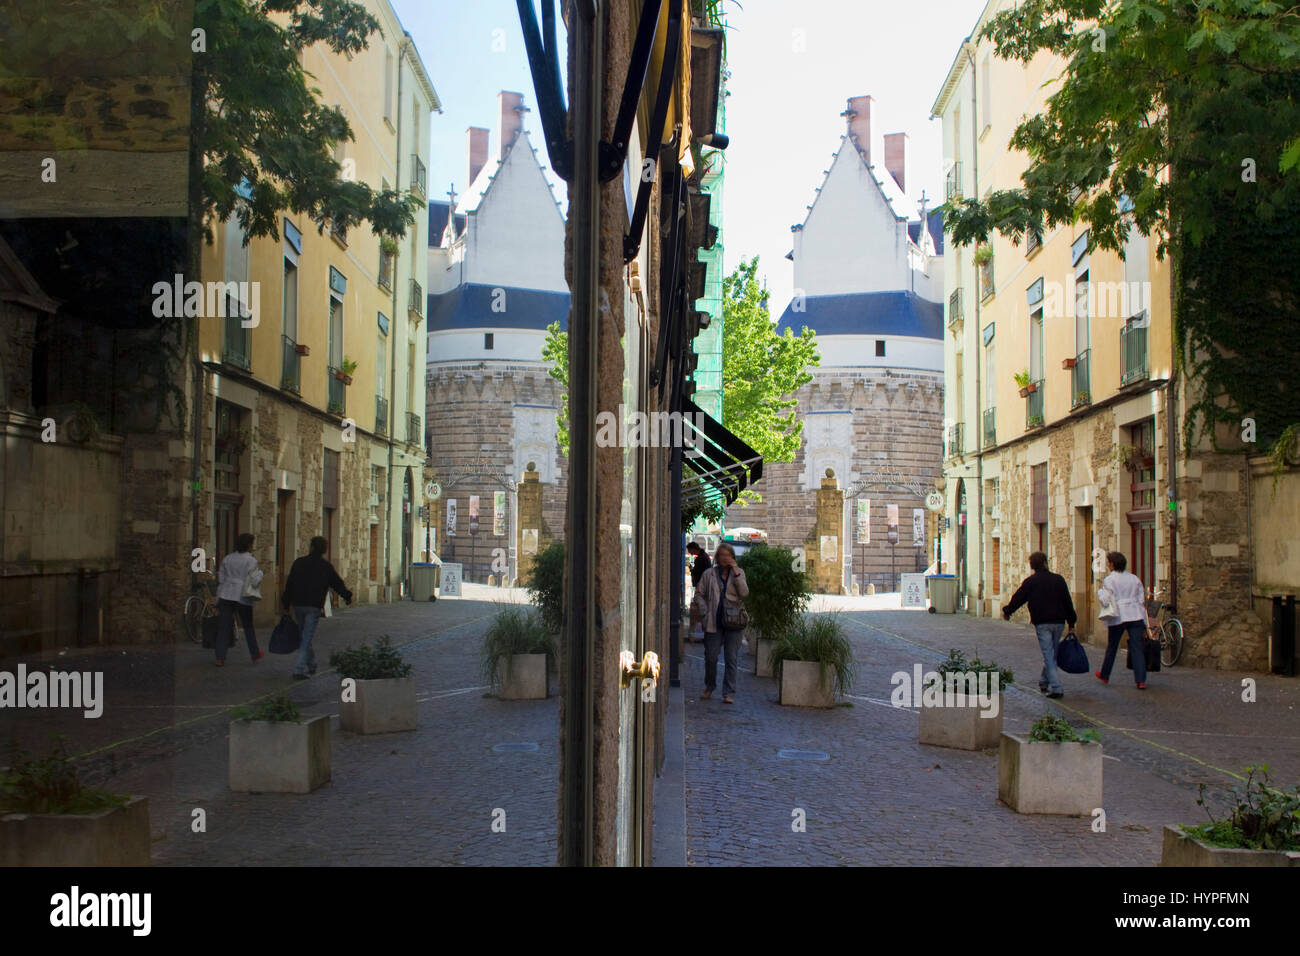 France, North-Western France, Nantes, Rue du Chateau, reflections in shop window Stock Photo